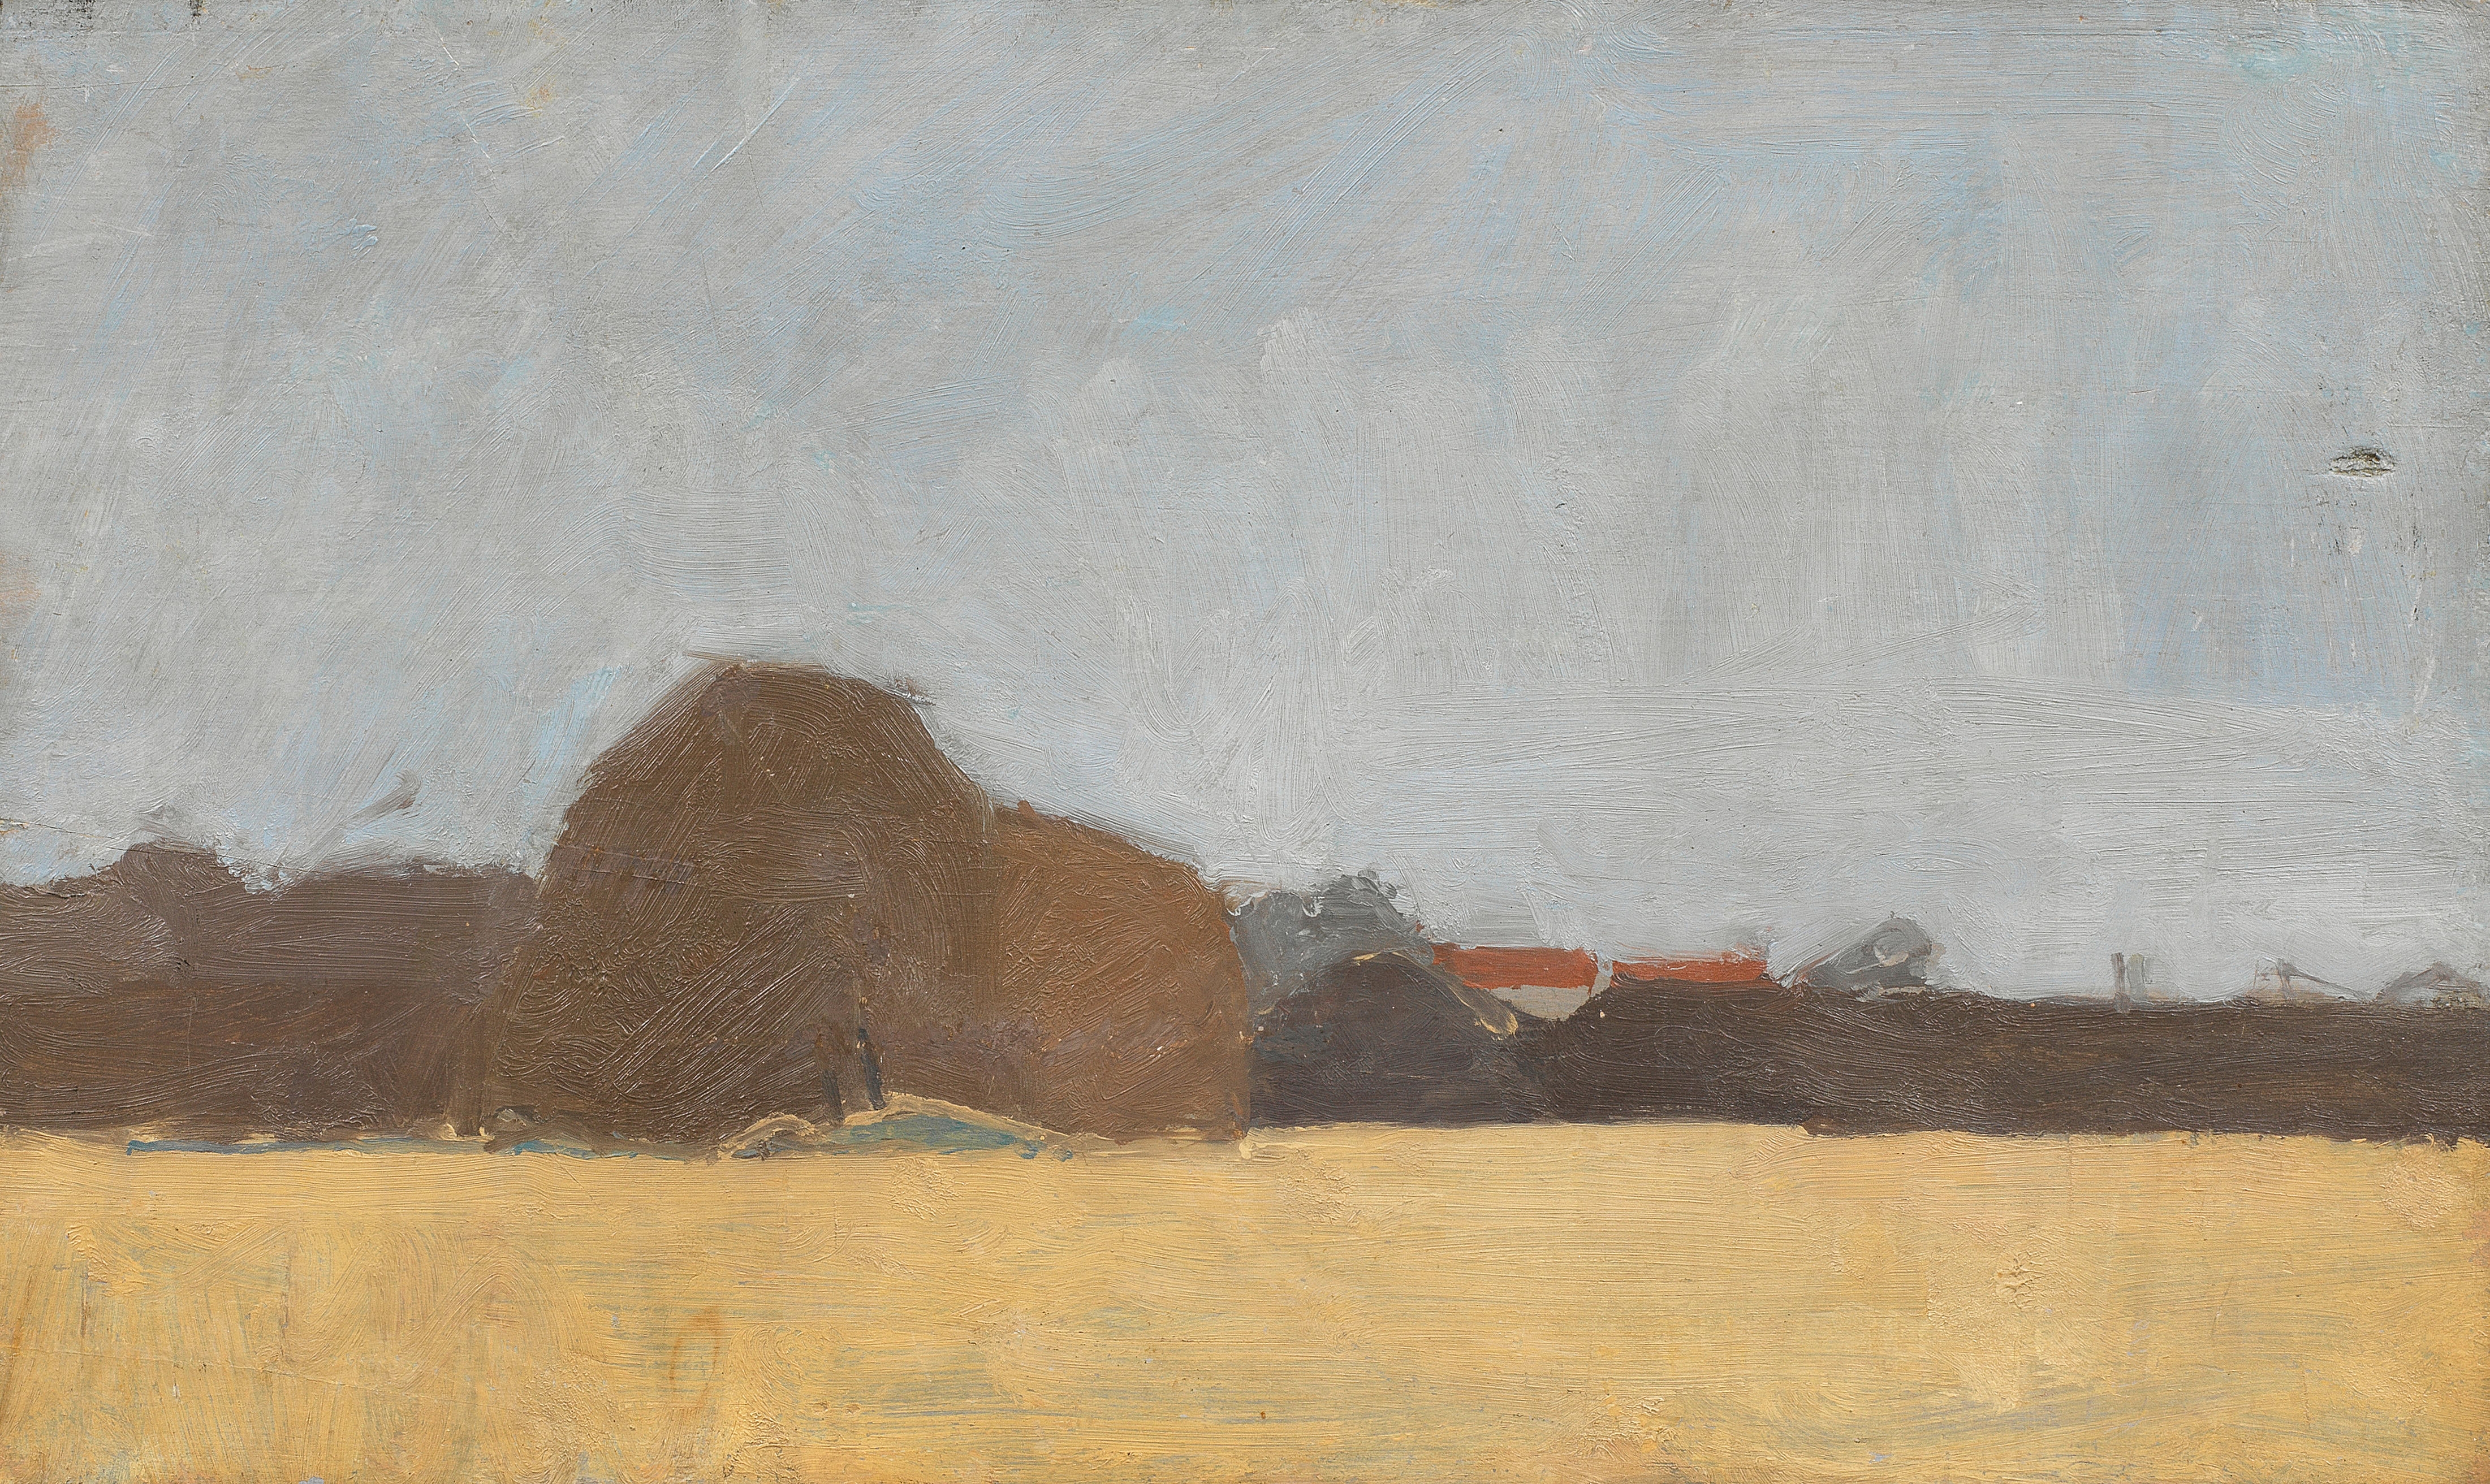 Artwork by Euan Uglow, Landscape, Edge of Field, Made of oil on board